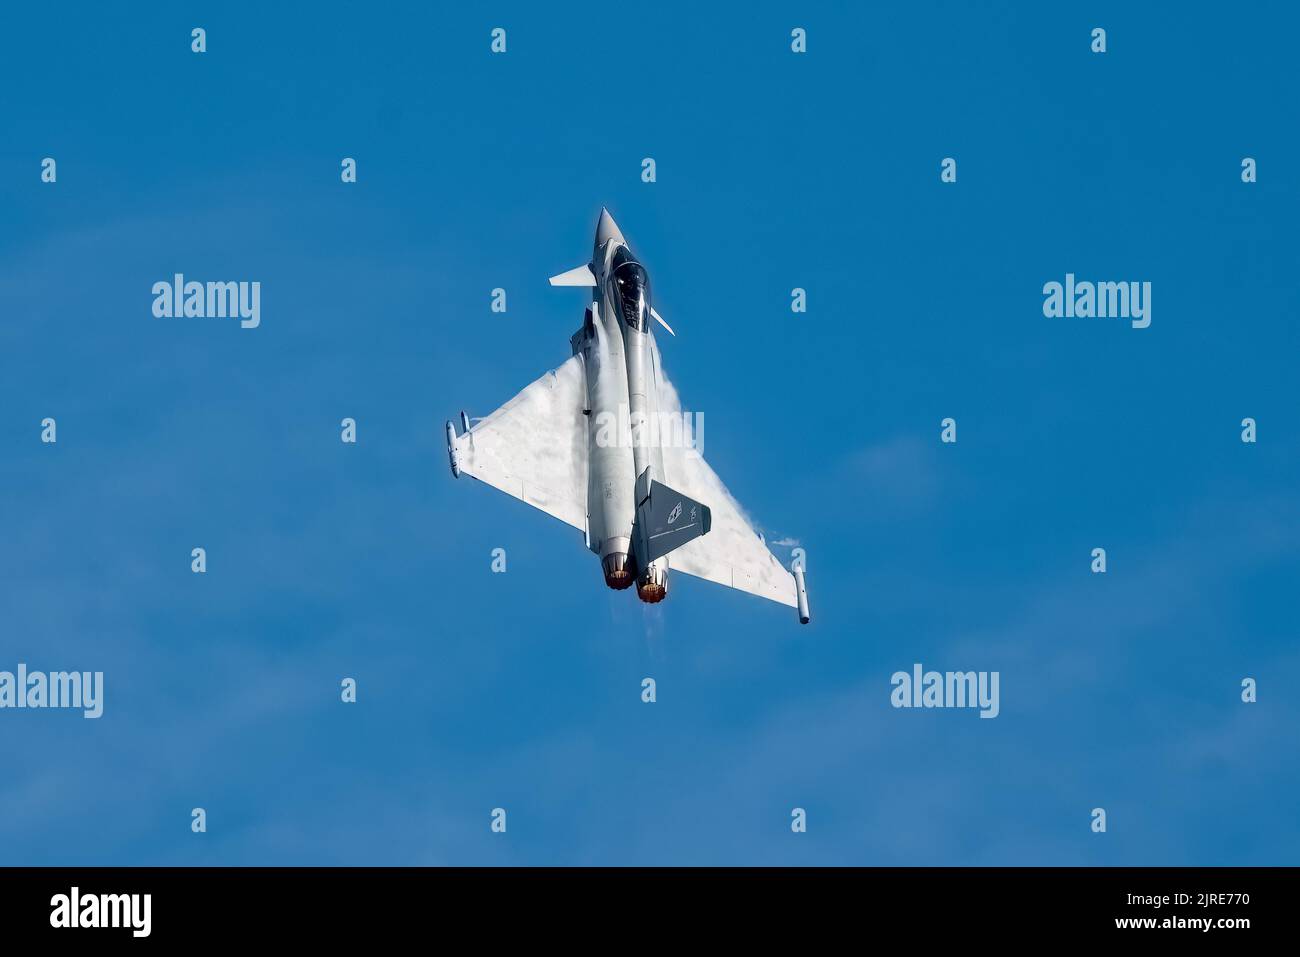 Eastbourne, East Sussex, UK. Featuring the RAF Typhoon at the annual Eastbourne Airshow viewed from the beach at Eastboune. 18th August 2022. Credit David Smith/Alamy Live News Stock Photo